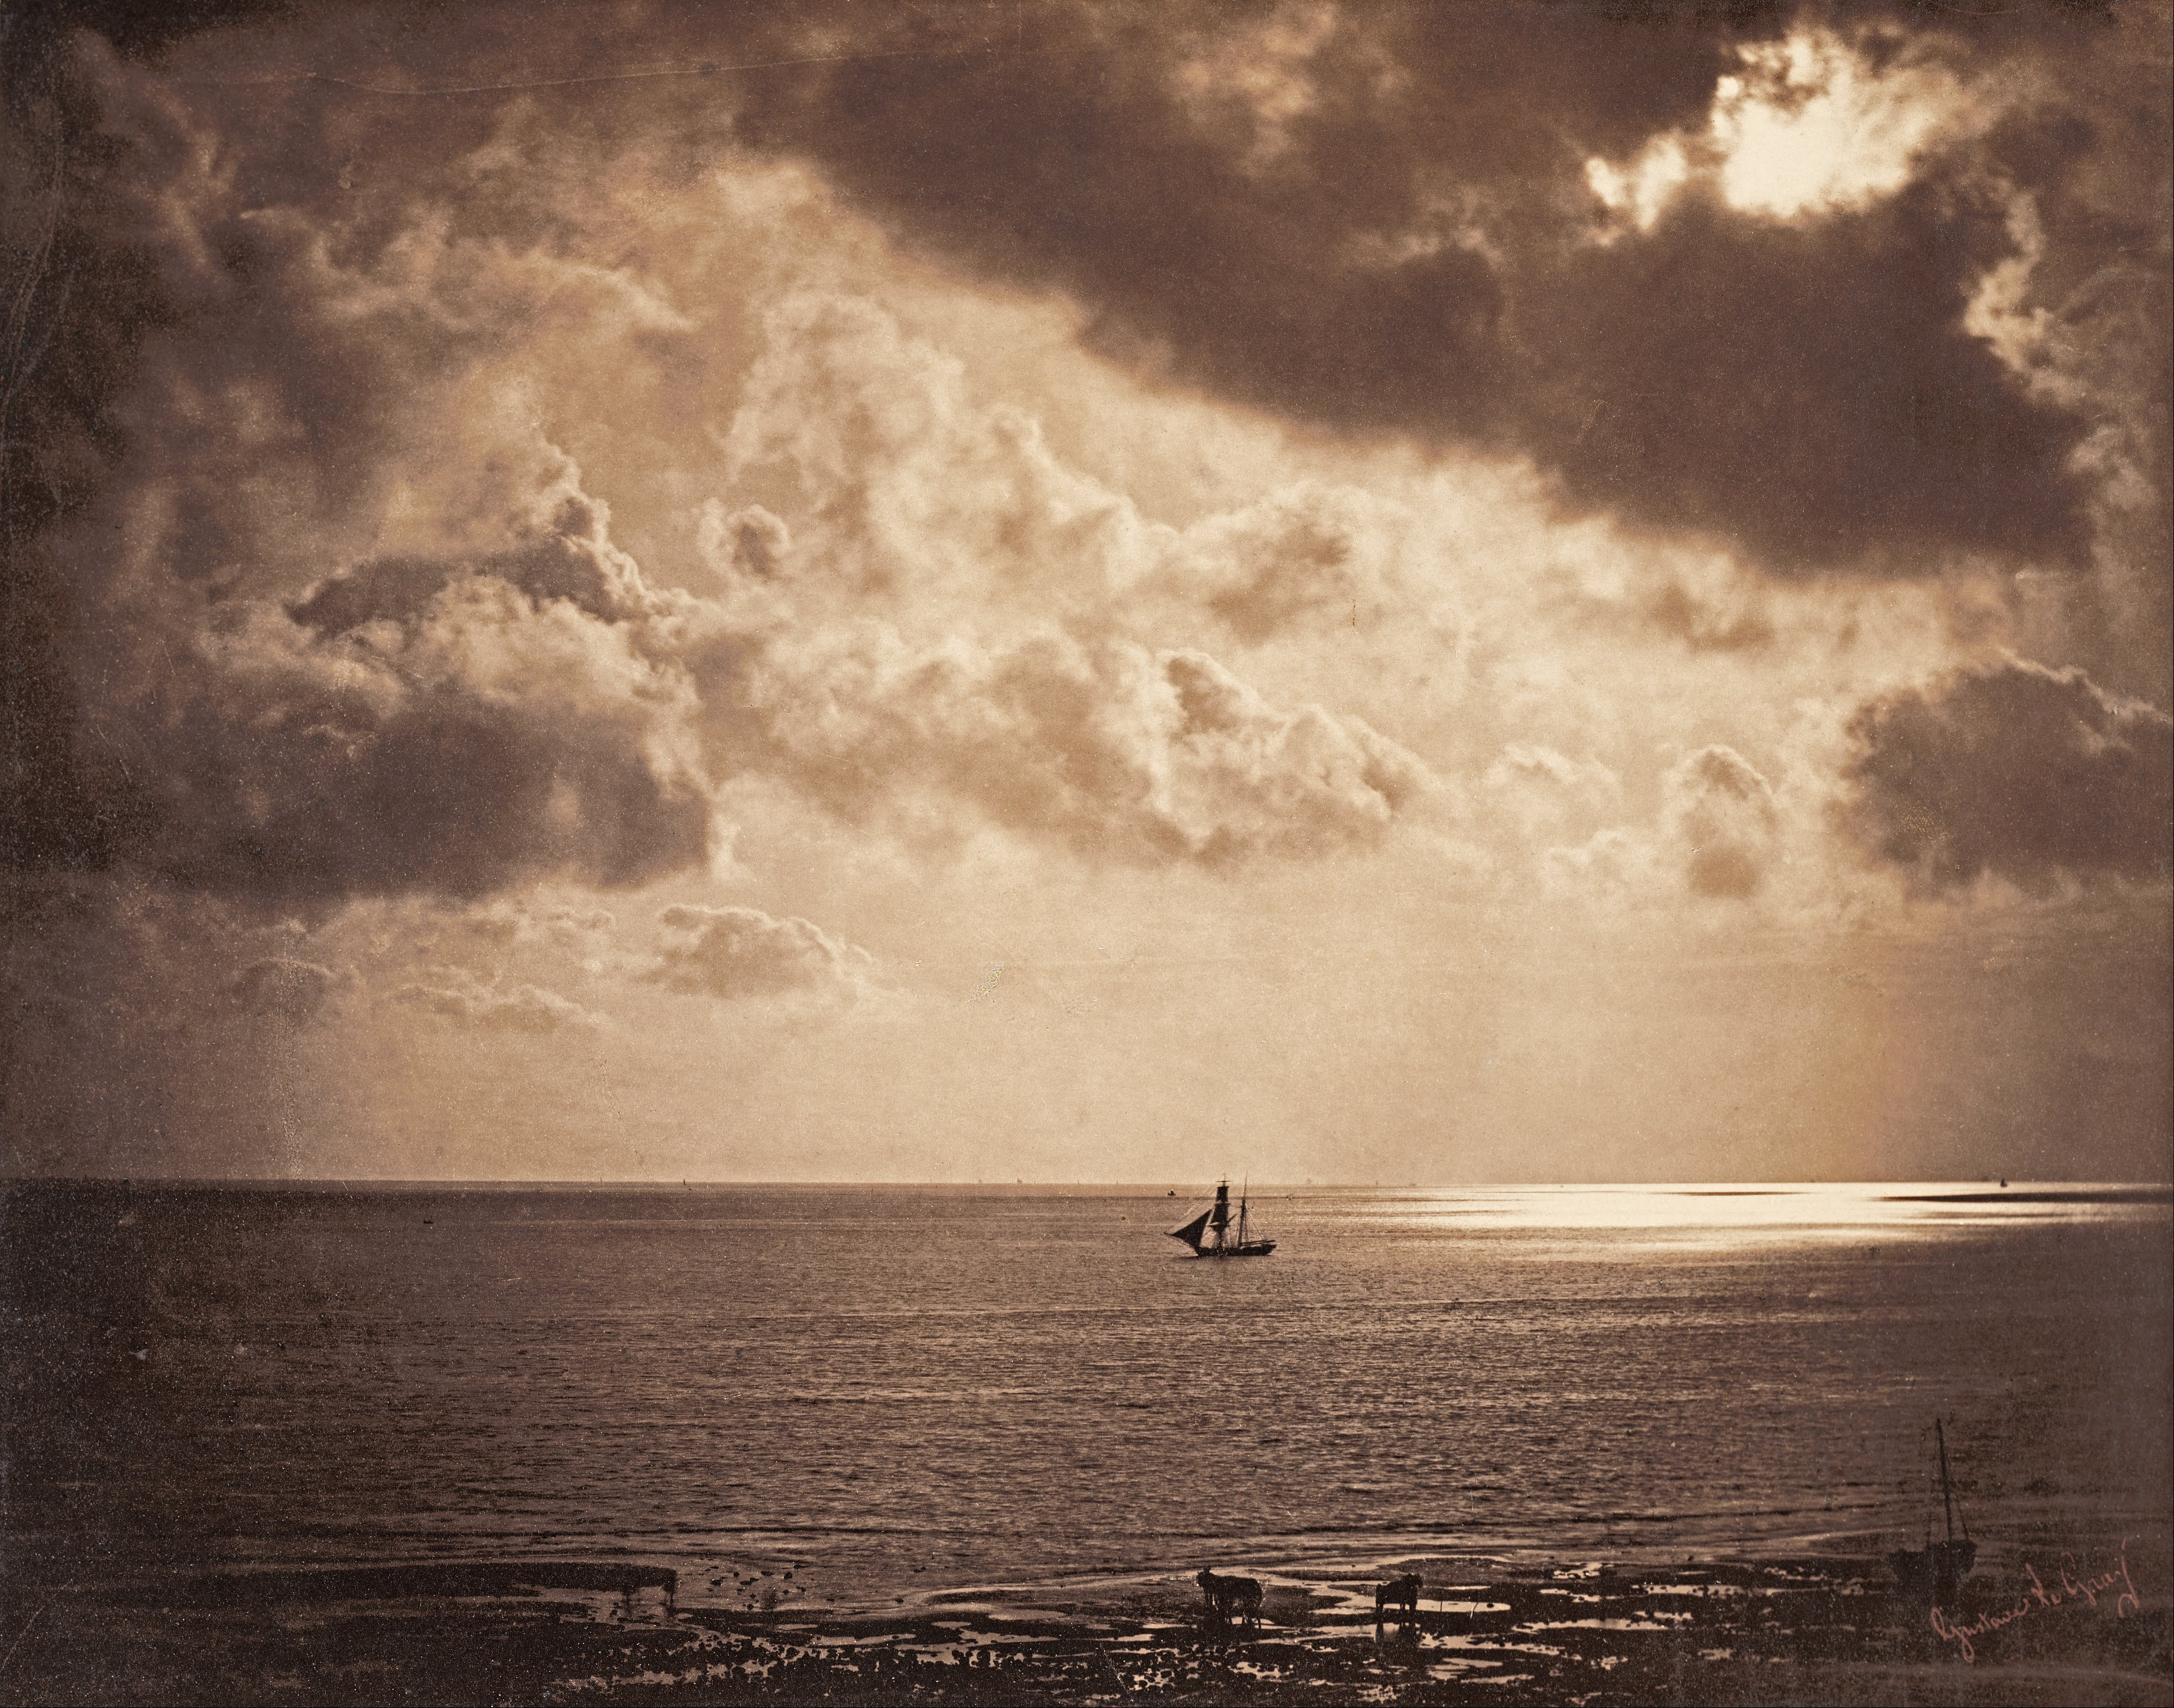 Brig upon the water, 1856, by Gustave Le Gray